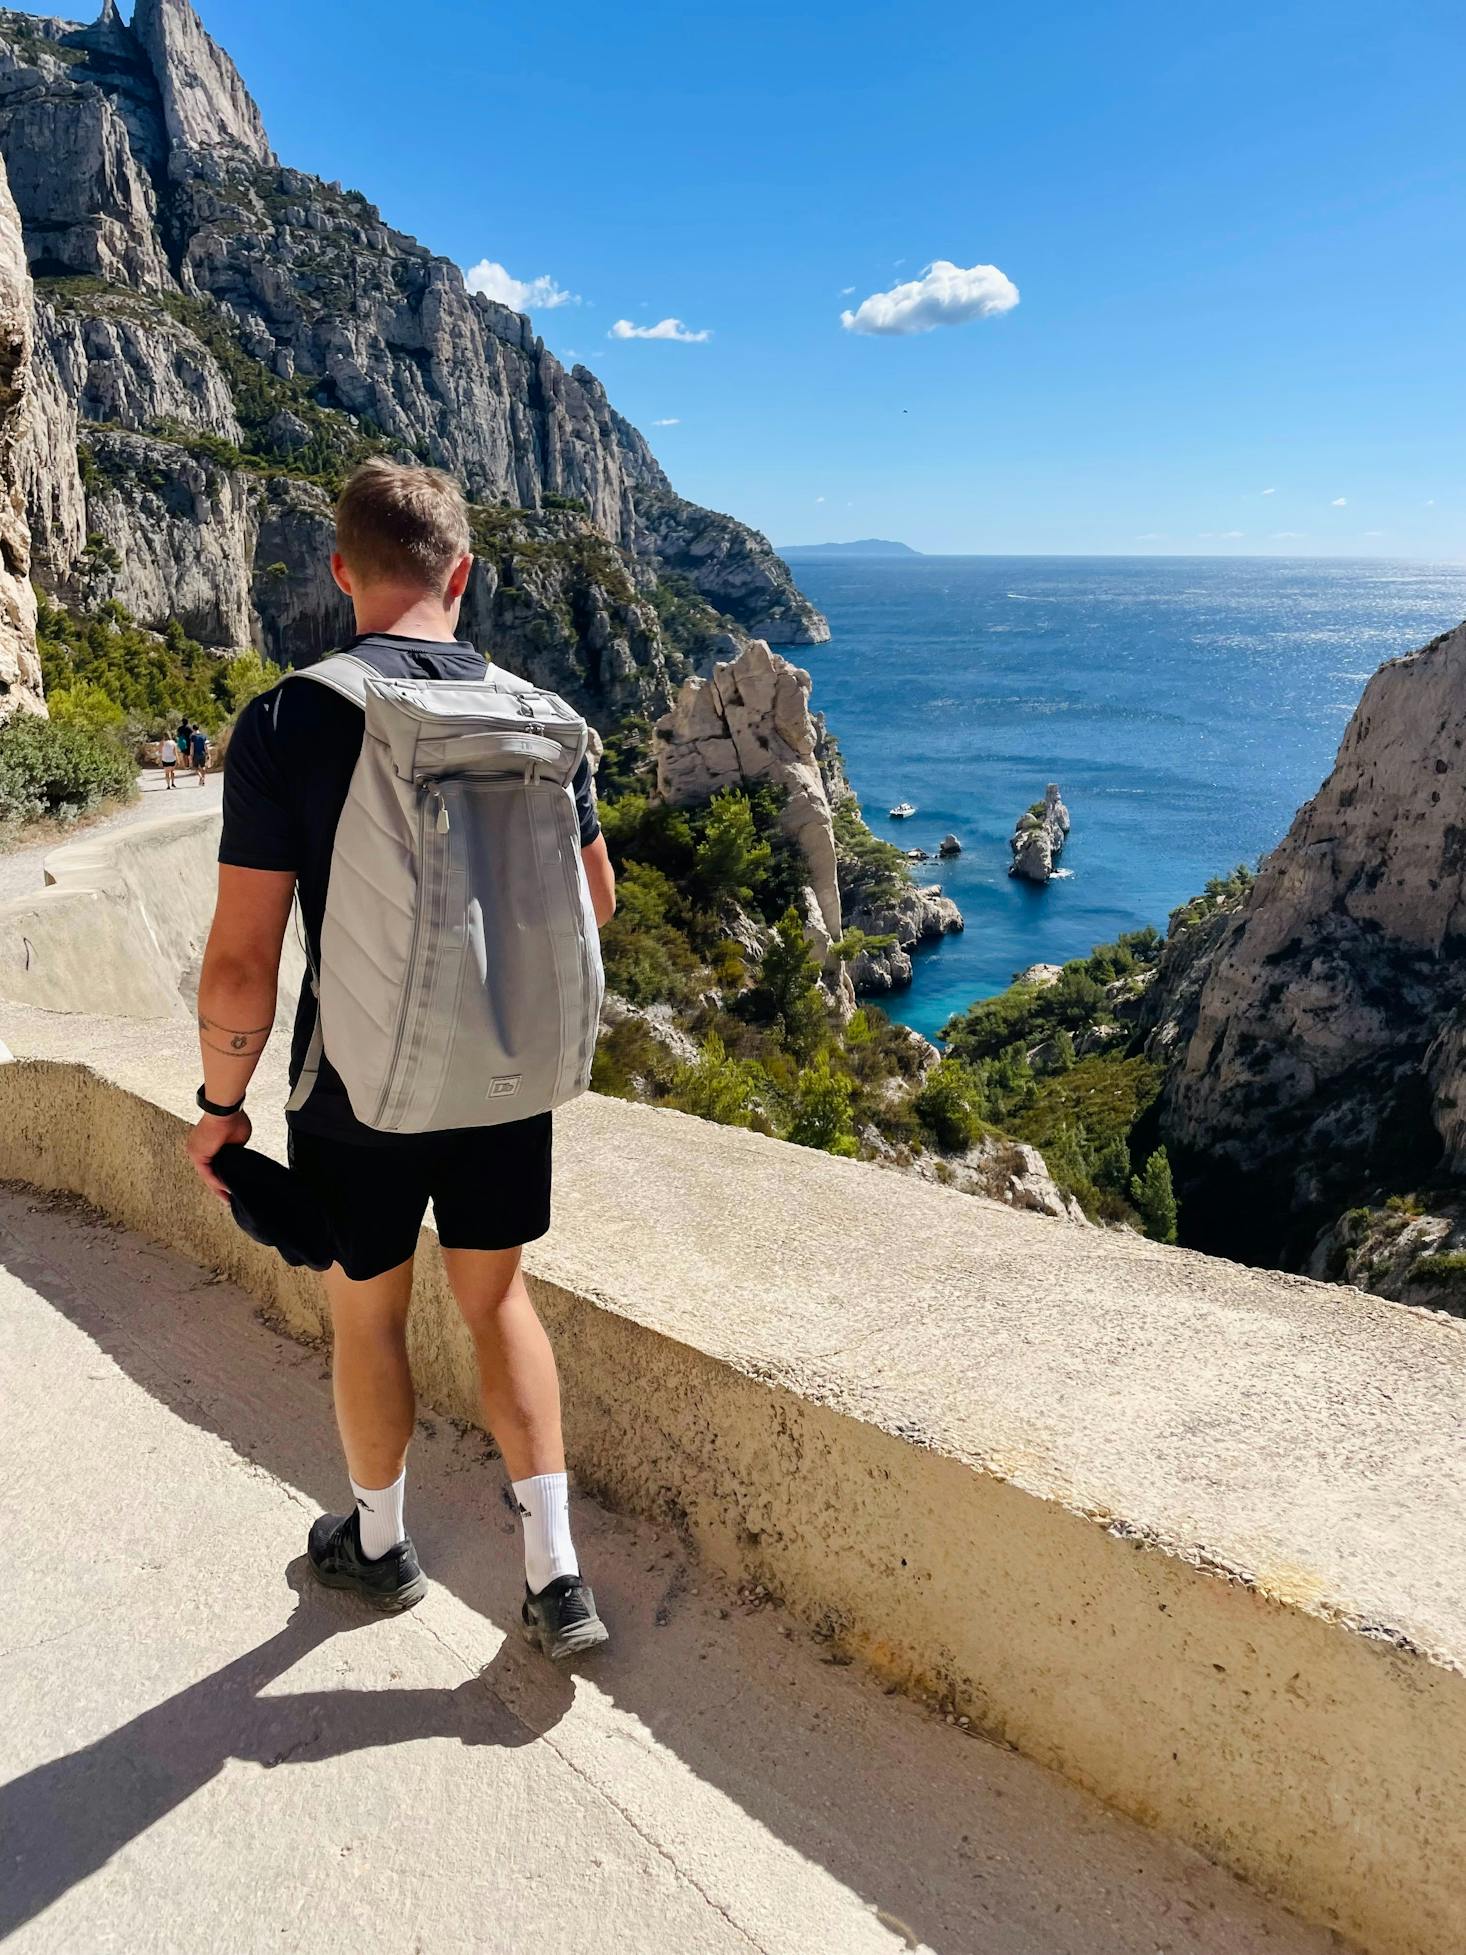 Hiking in Marseille, France